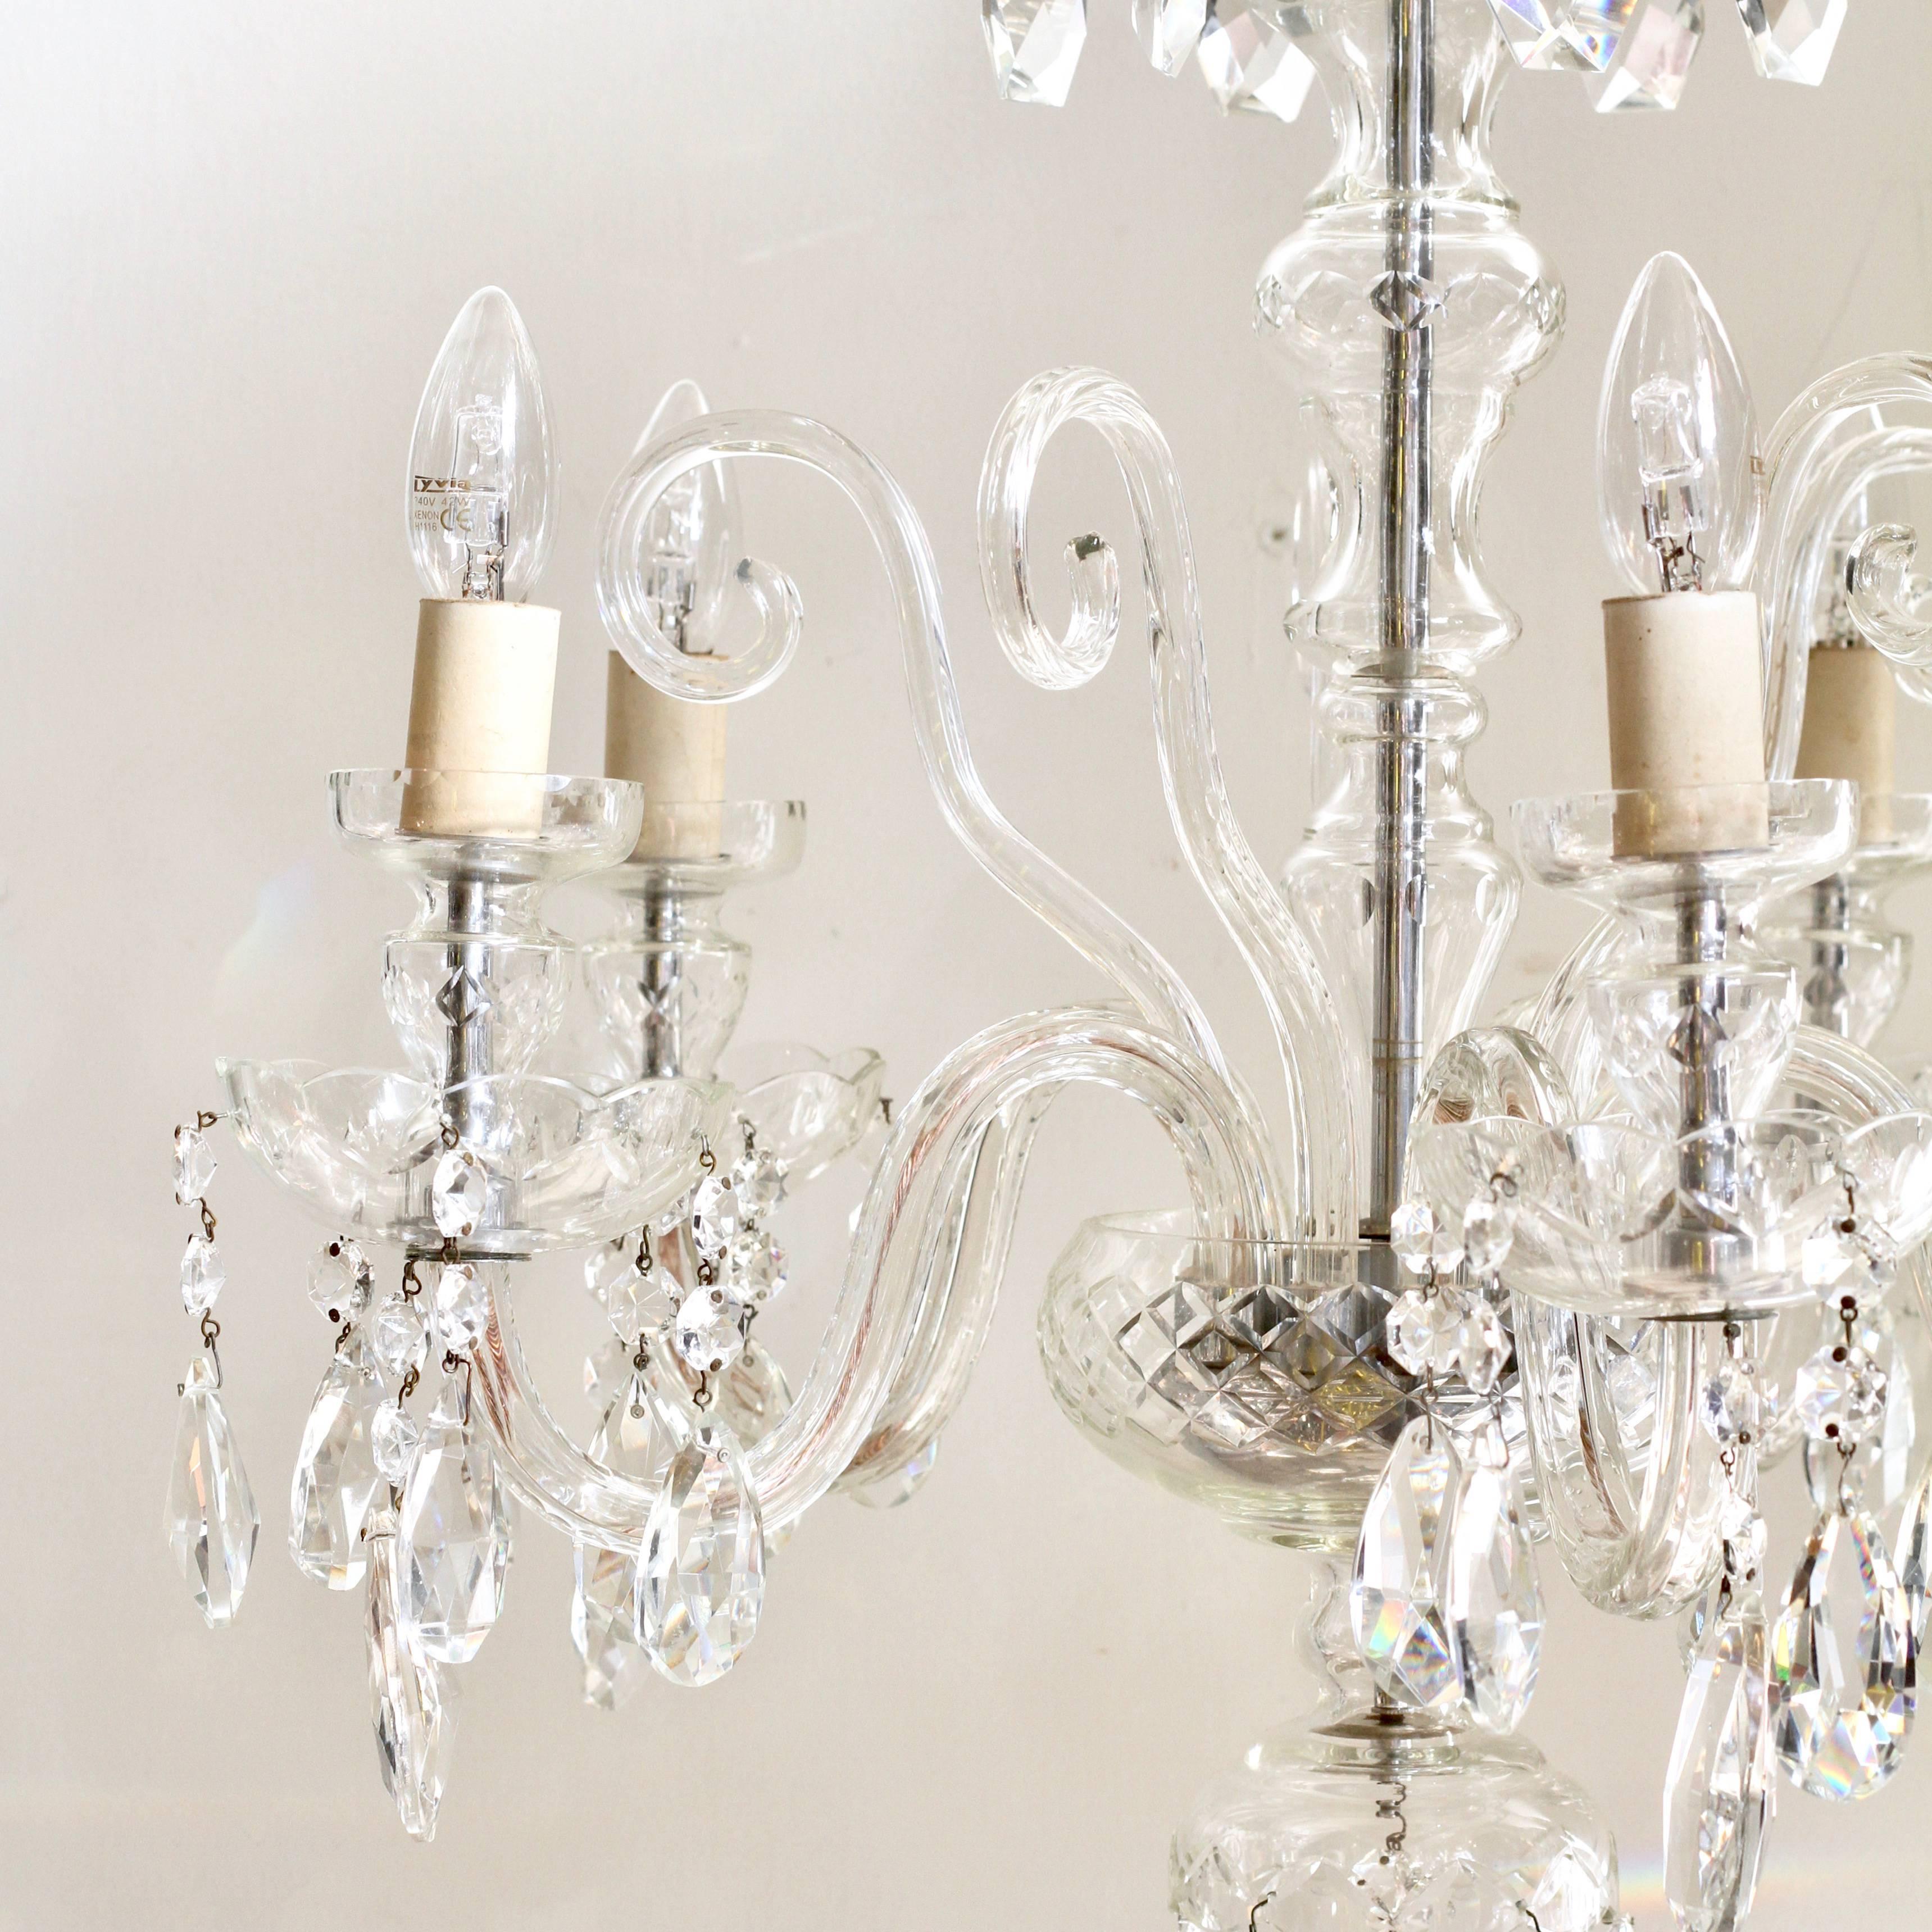 1930s French Large Bohemian Crystal Swan Neck Chandelier with Cut Crystal Drops 3